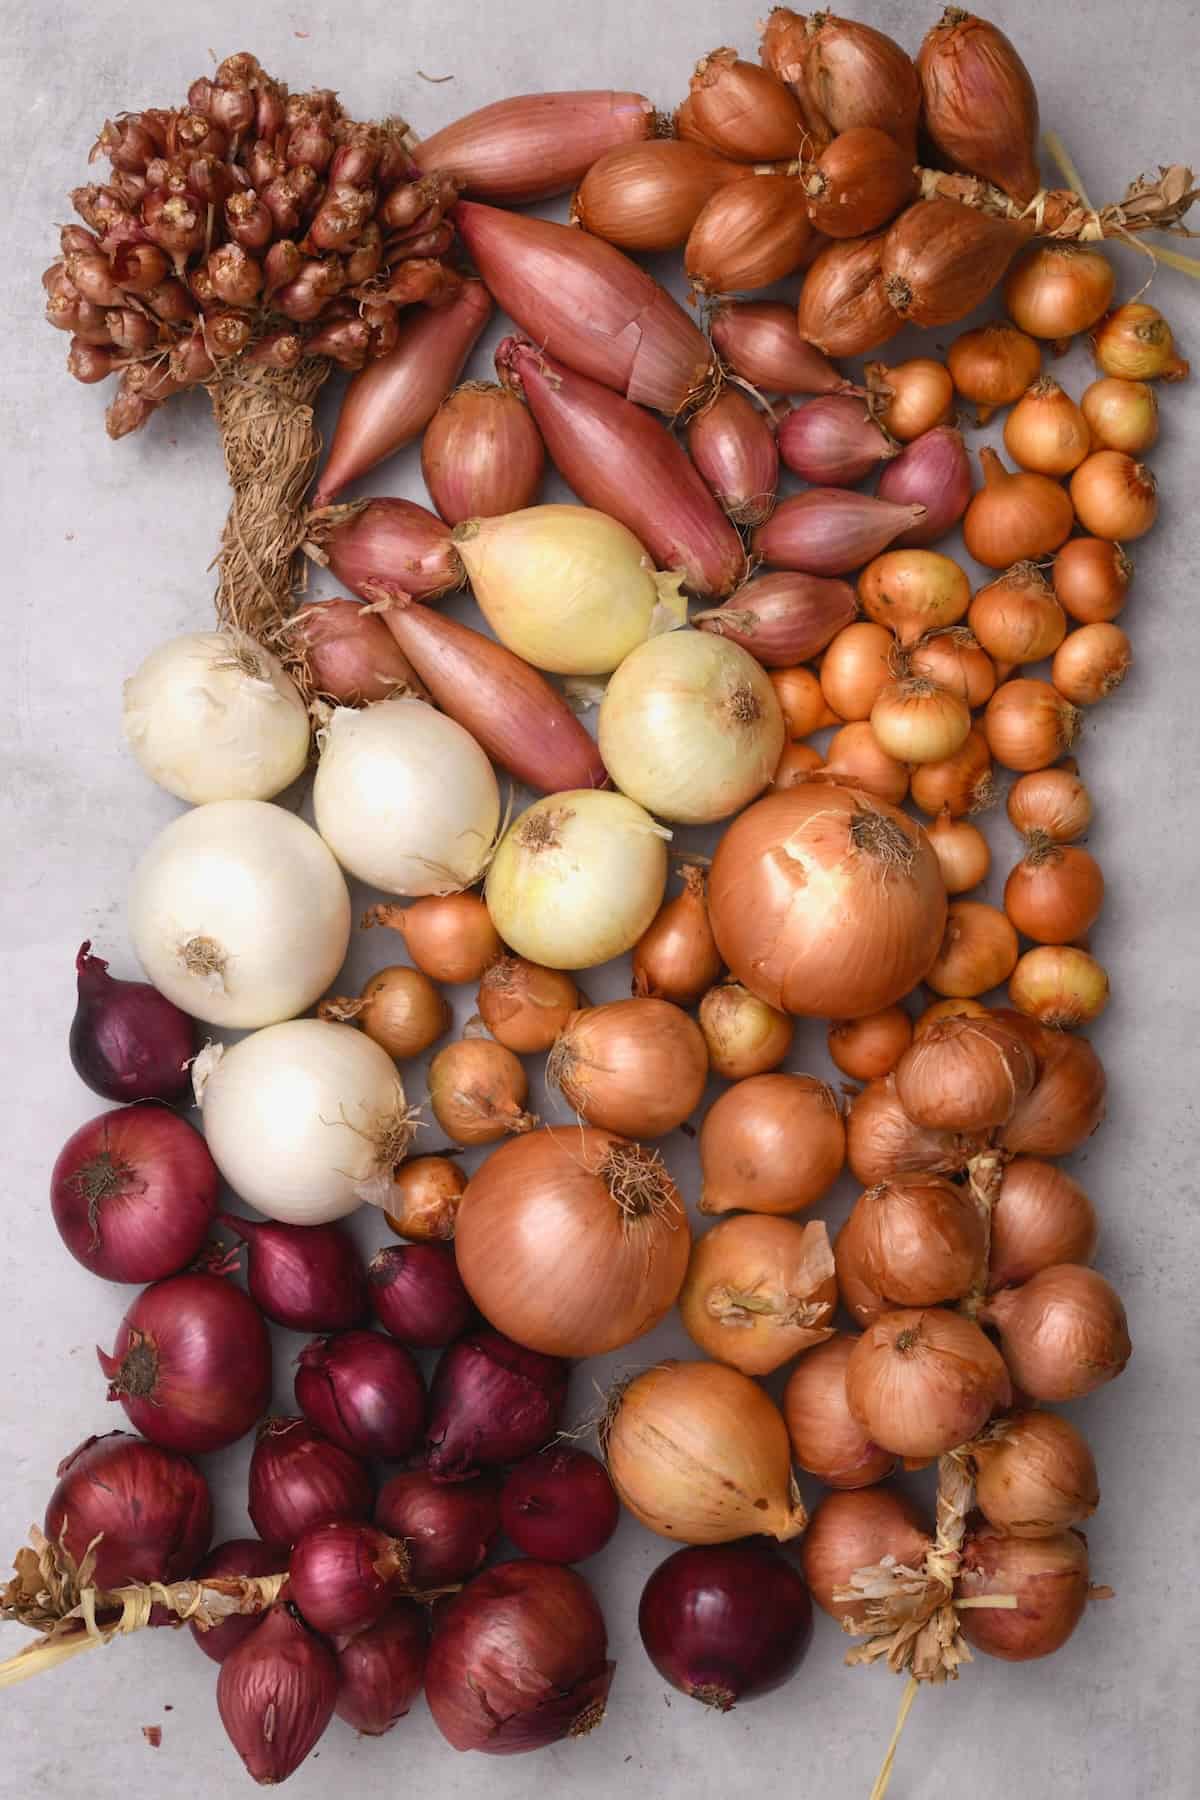 Different types of onions on a flat surface